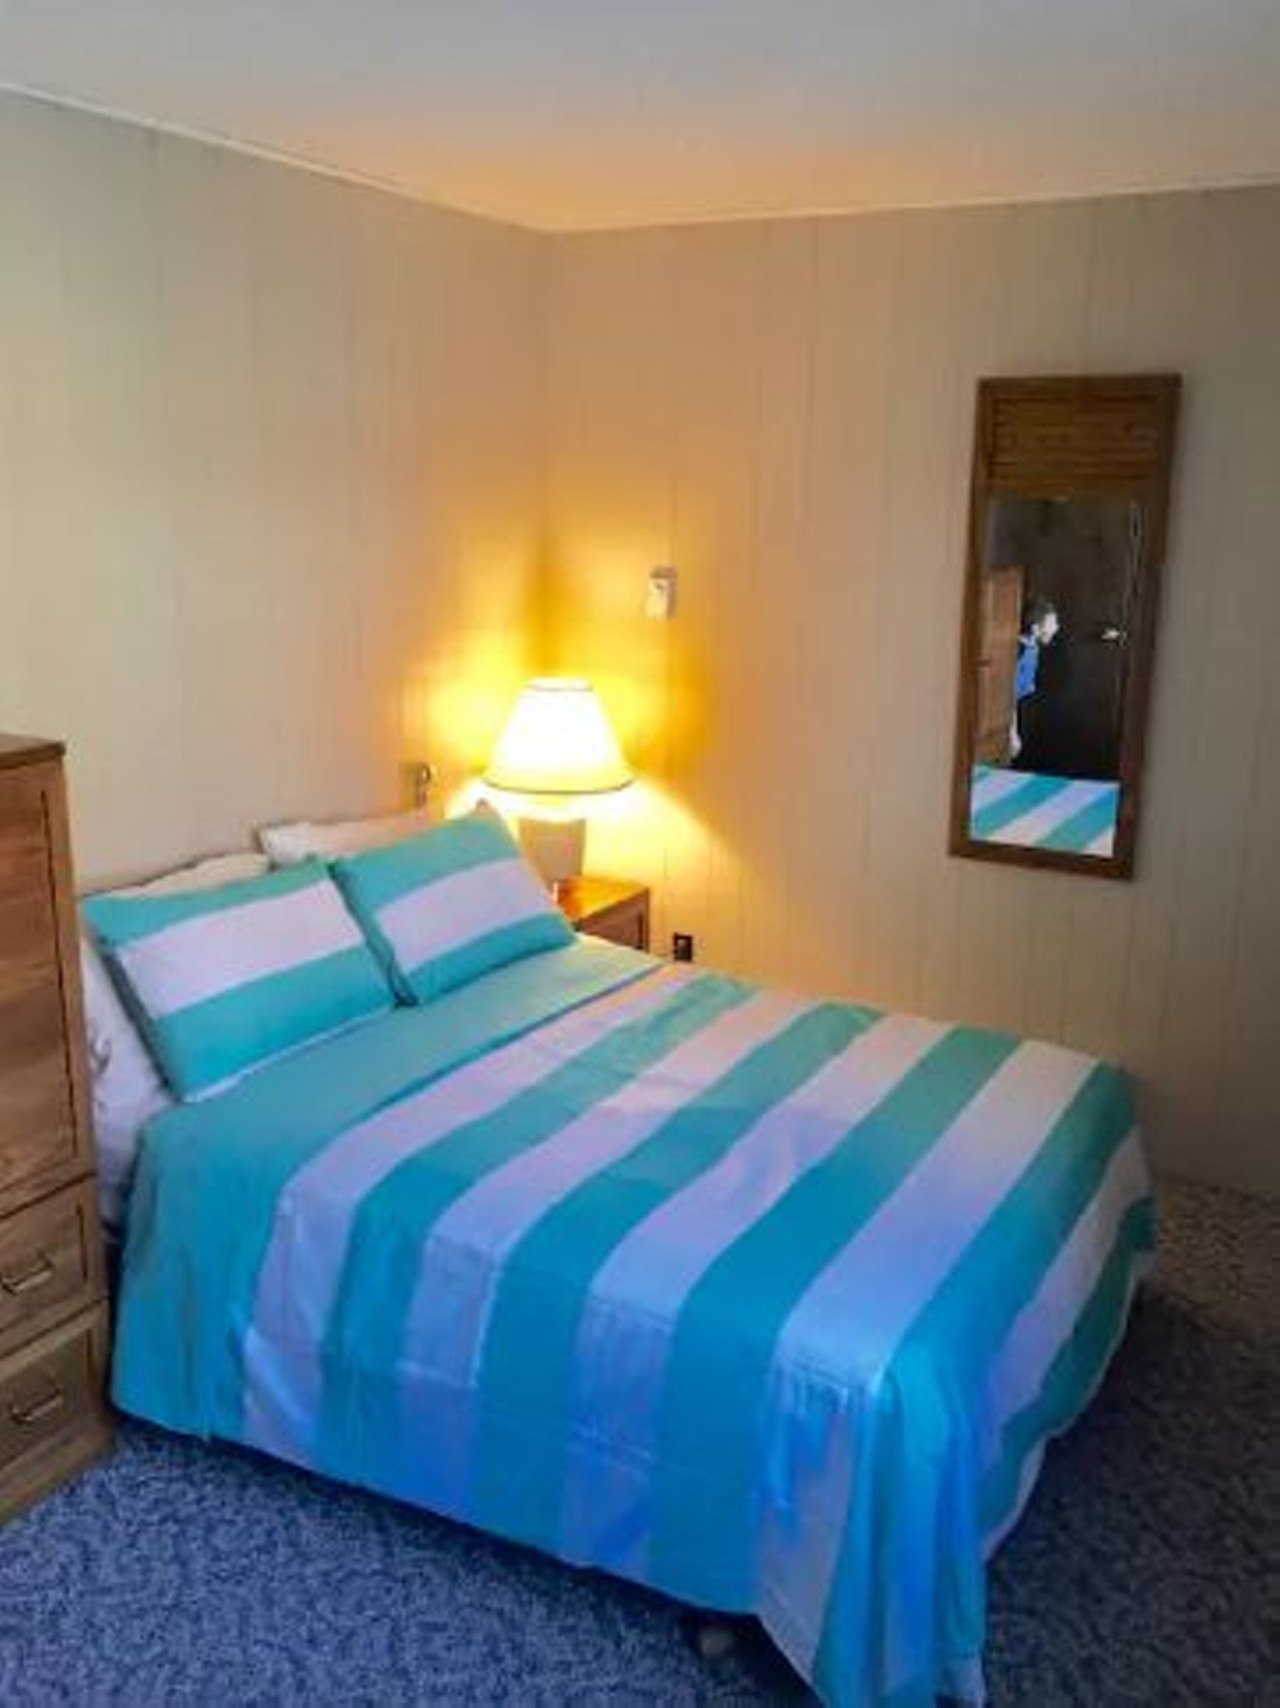 Prudenville, Michigan
Average nightly rate: $175
The beauty of this college is the close proximity to Houghton. Conveniently the lake is right outside the front door, enjoy the gorgeous daytime views and amazing sunset views at your leisure. This cottage is truly a wonderful weekend escape. 